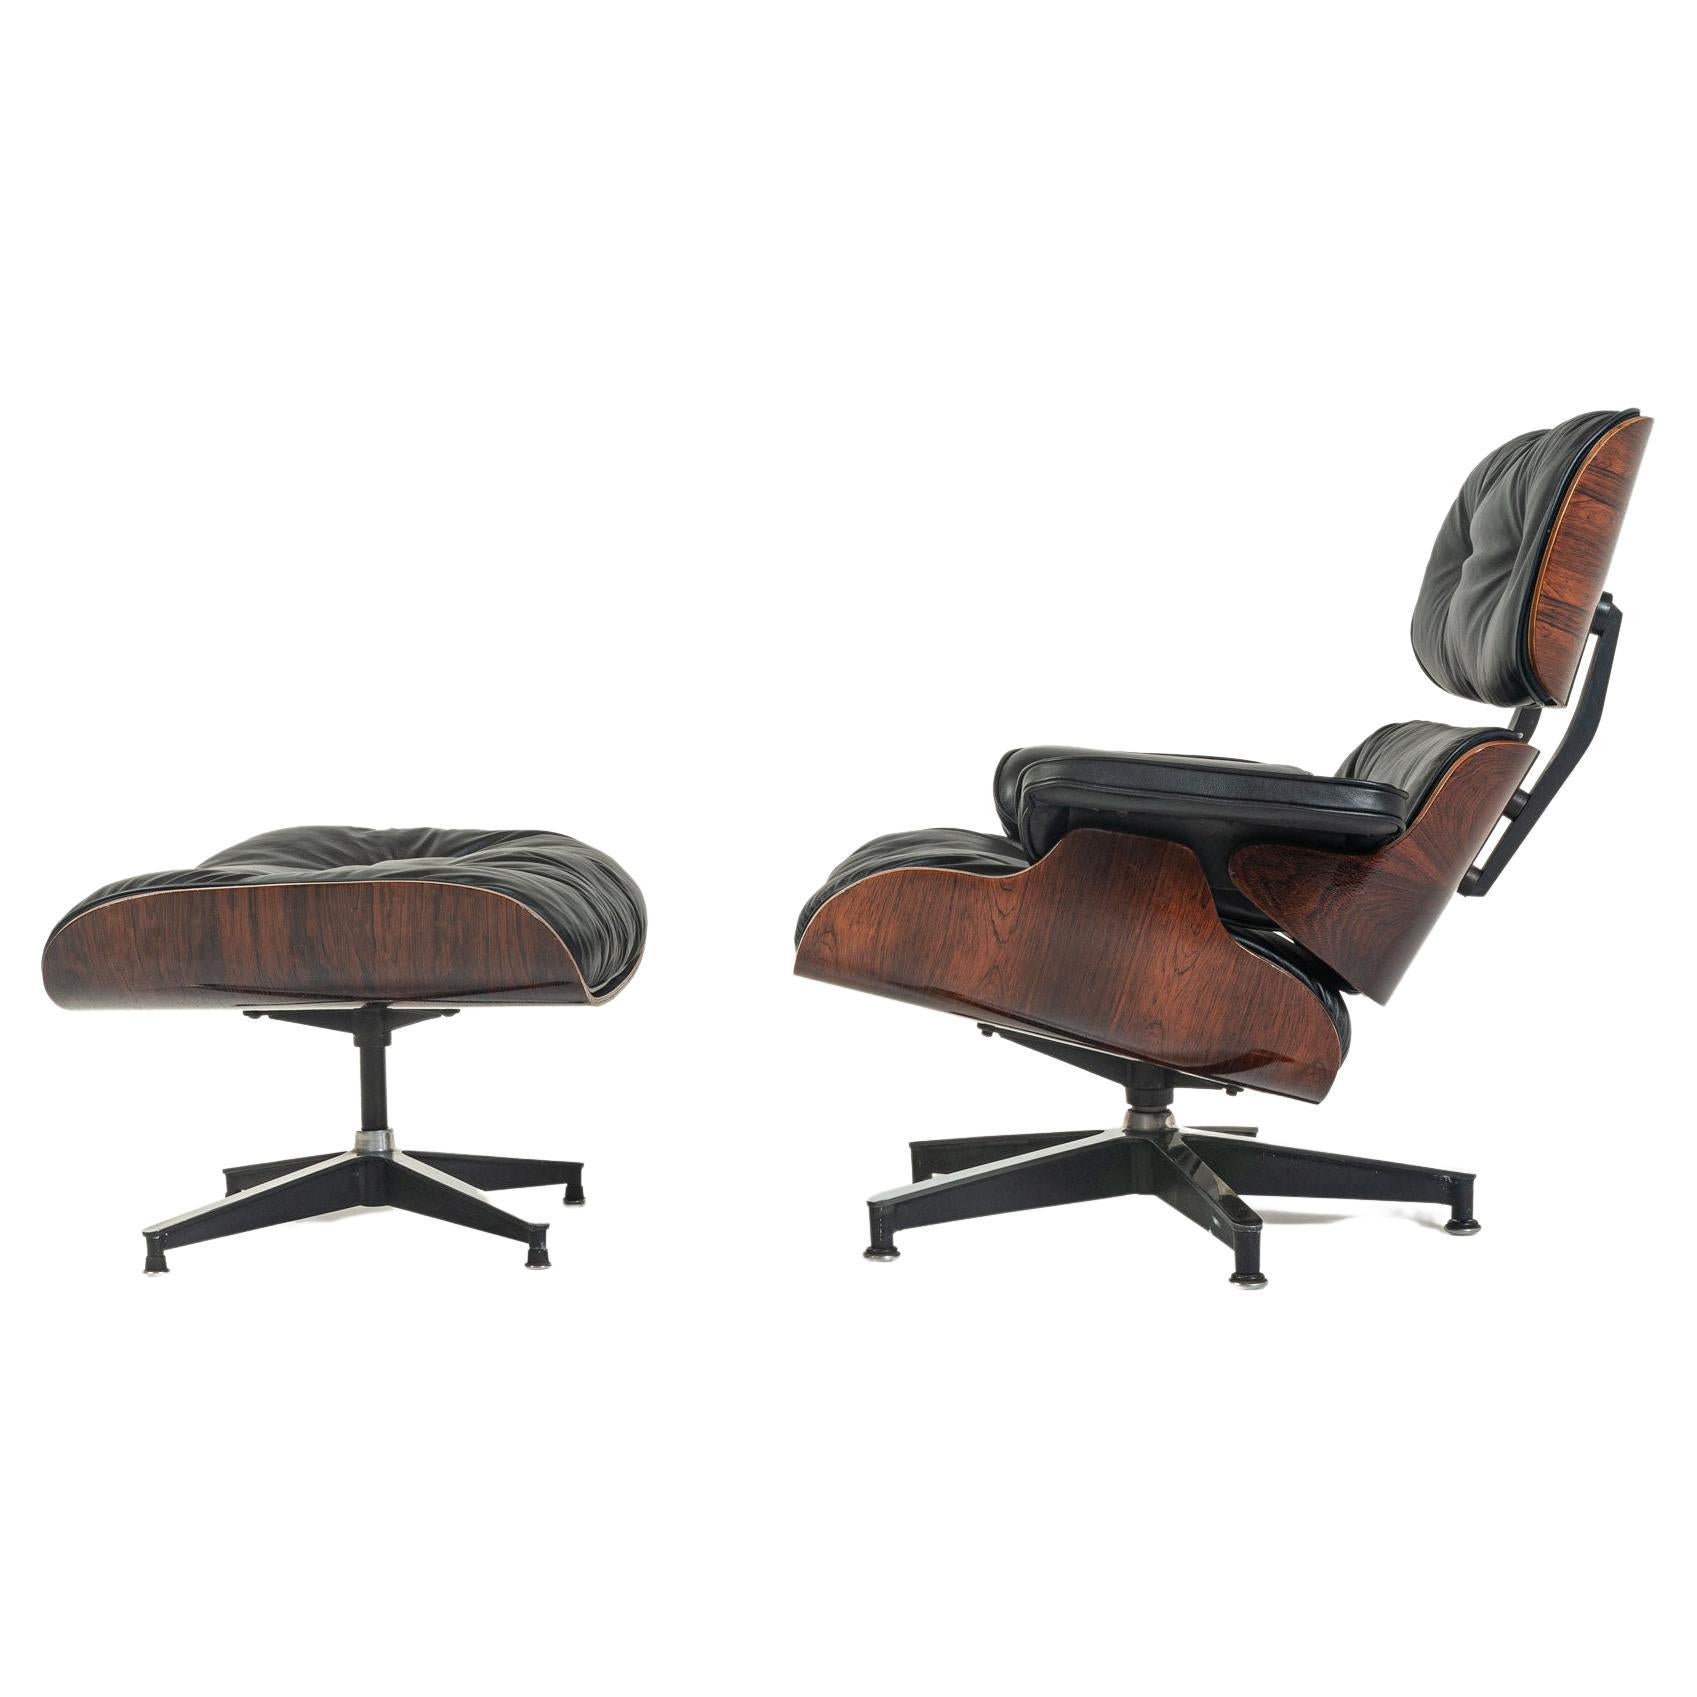 Fully Restored 1st Gen 1959 Eames Lounge Chair and Boot Glide Ottoman